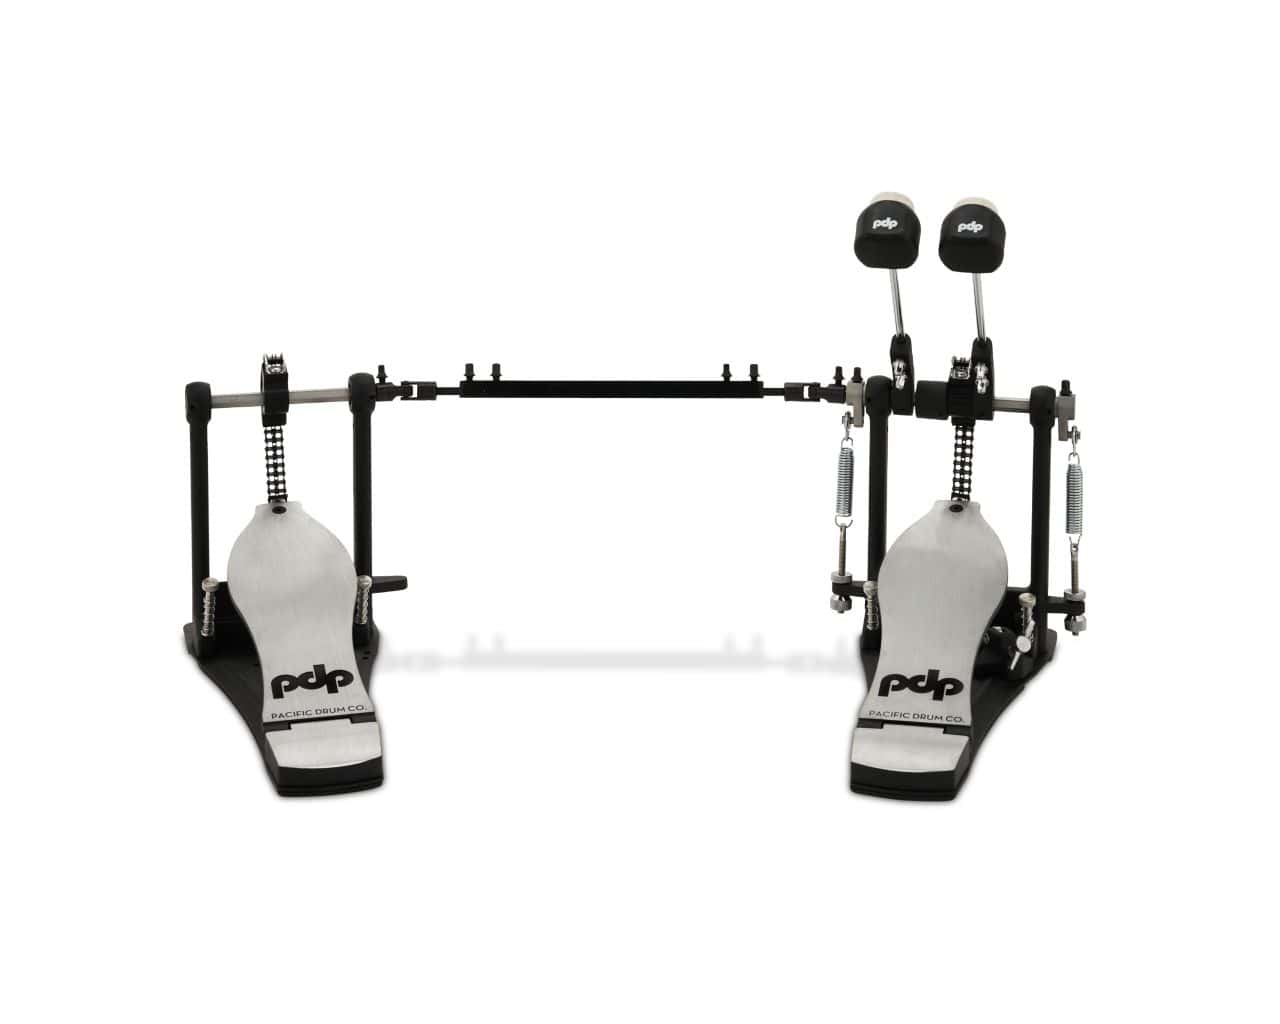 PDP BY DW 800 SERIES DOUBLE PEDAL PDDP812